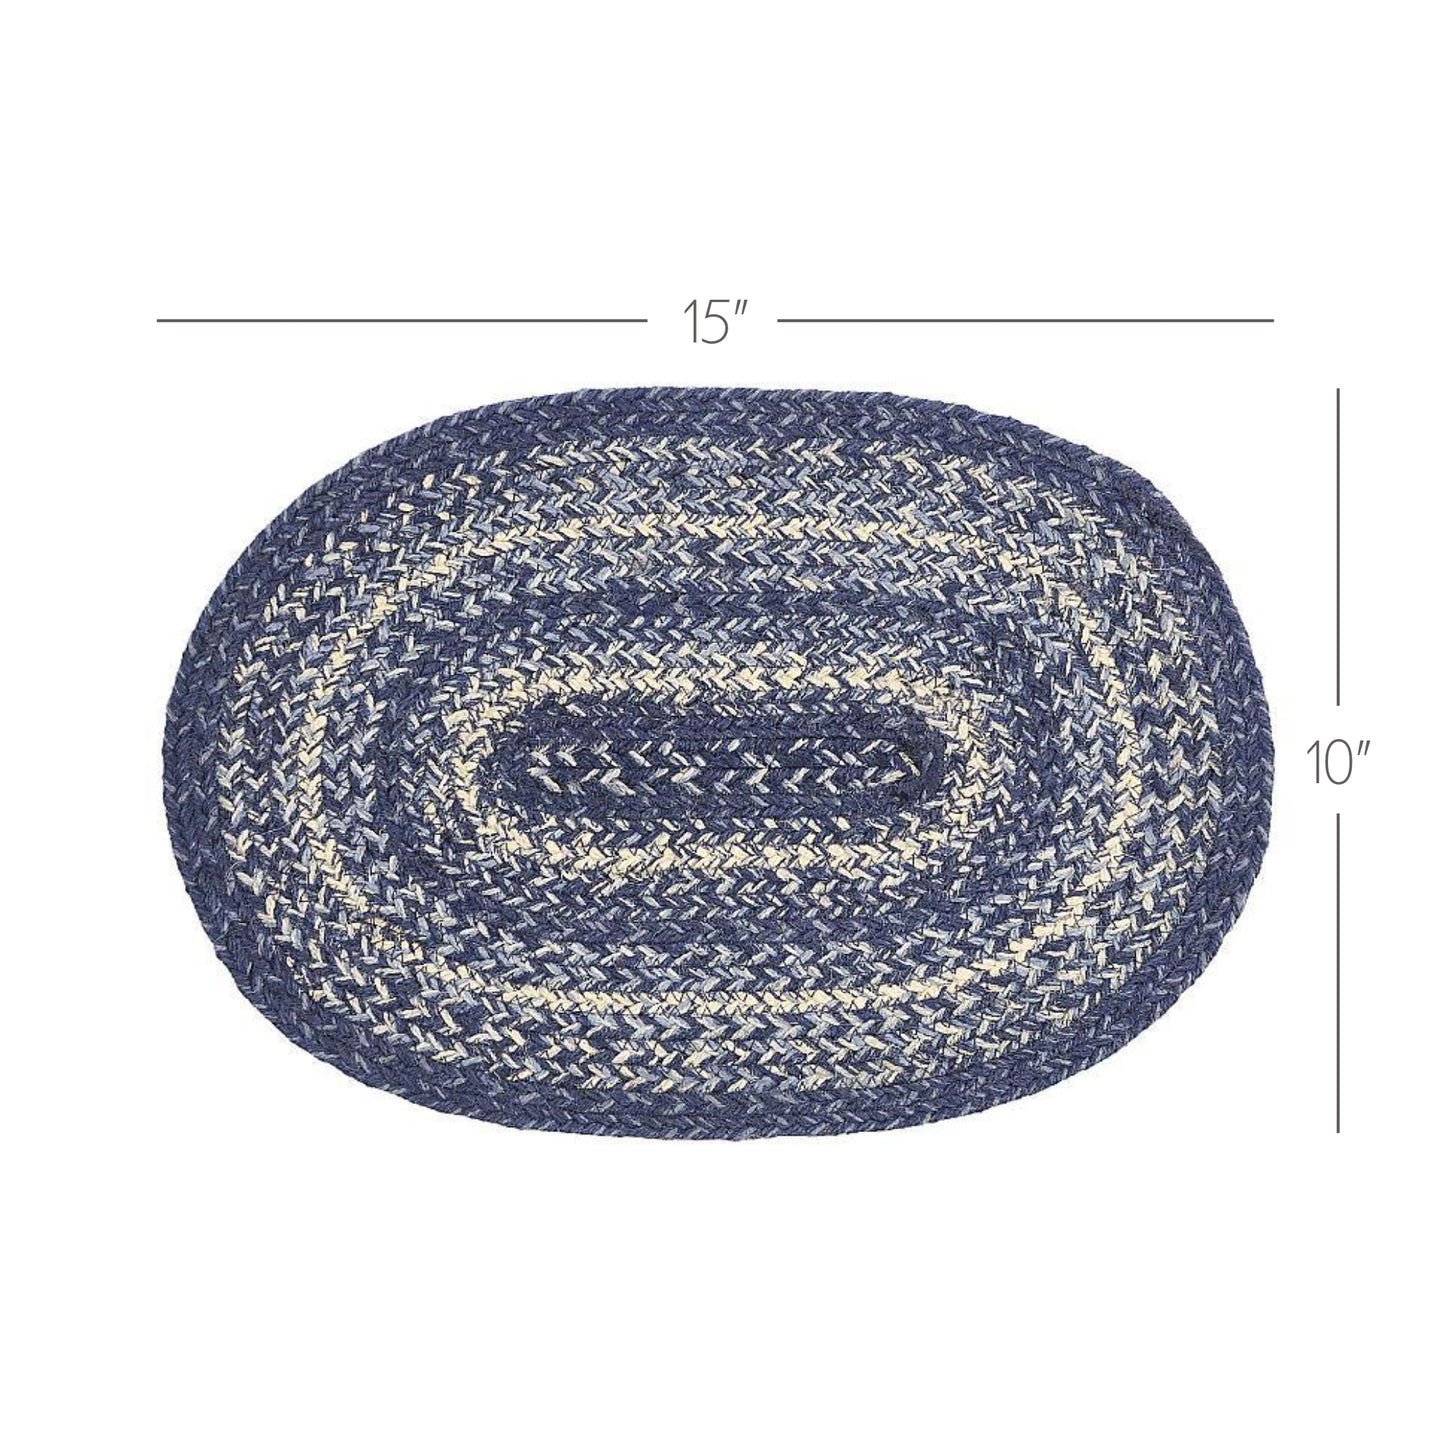 67100-Great-Falls-Blue-Jute-Oval-Placemat-10x15-image-3